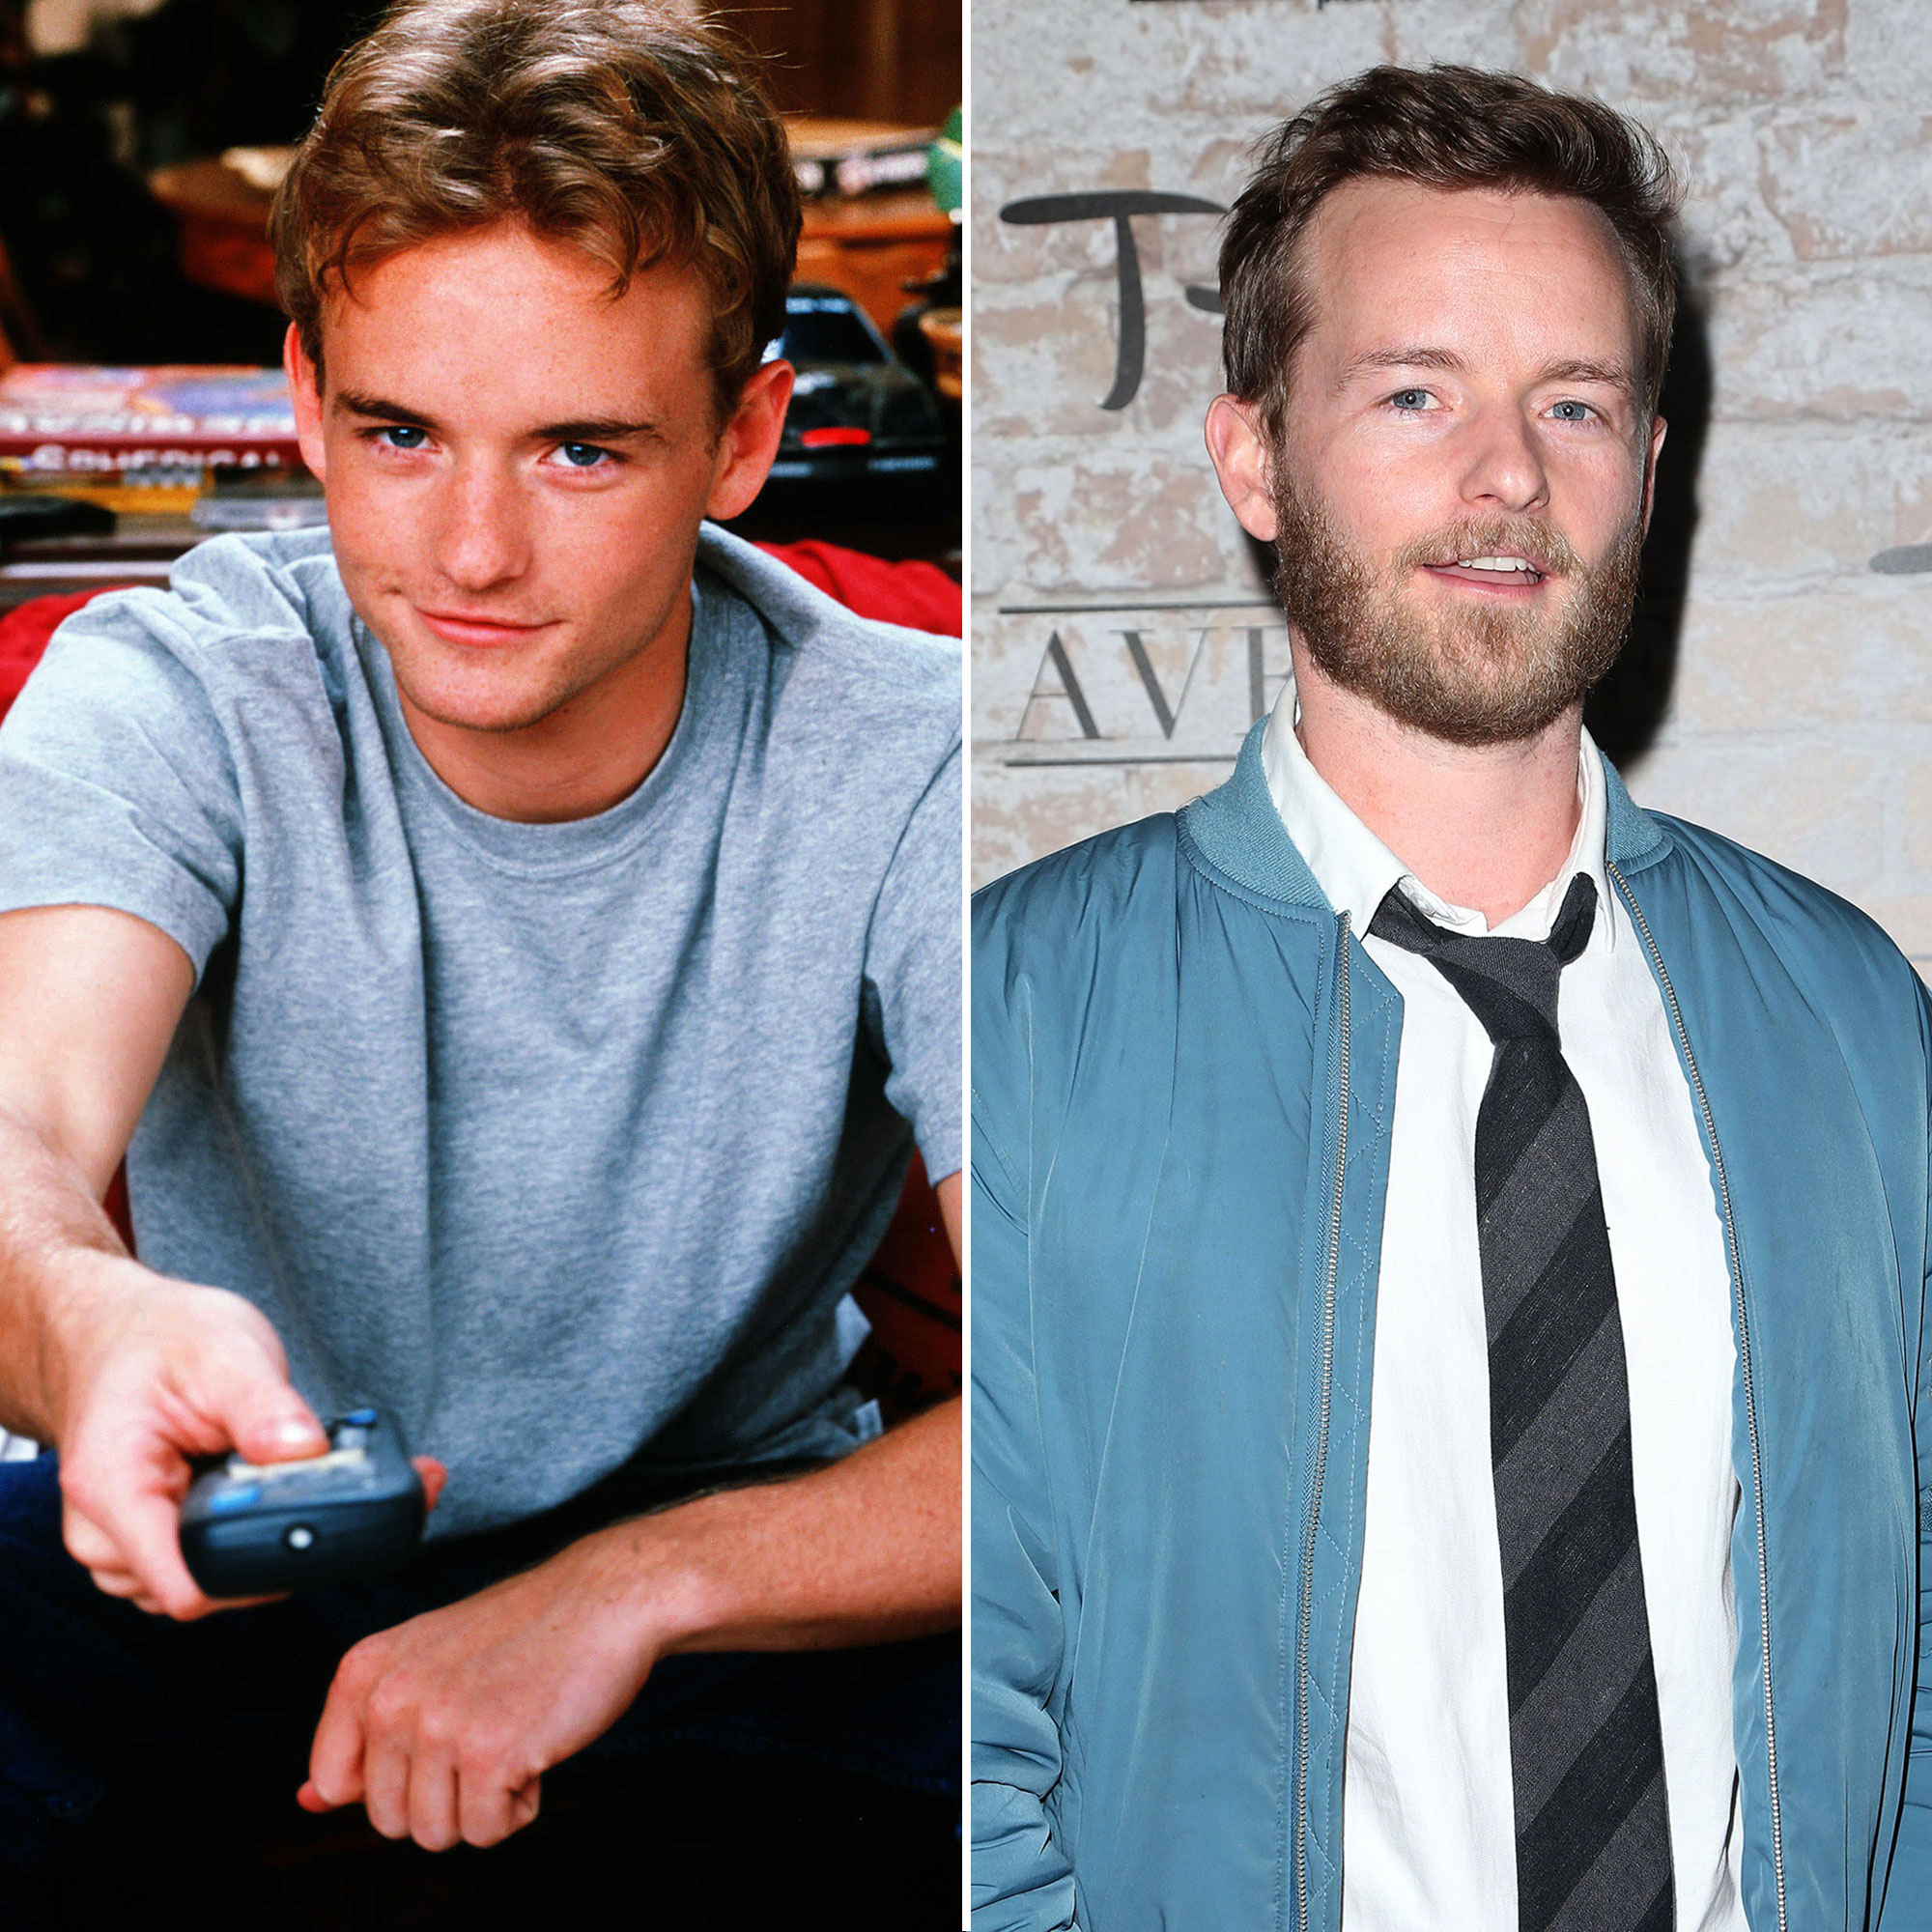 Malcolm in the Middle' Cast: Where Are They Now?